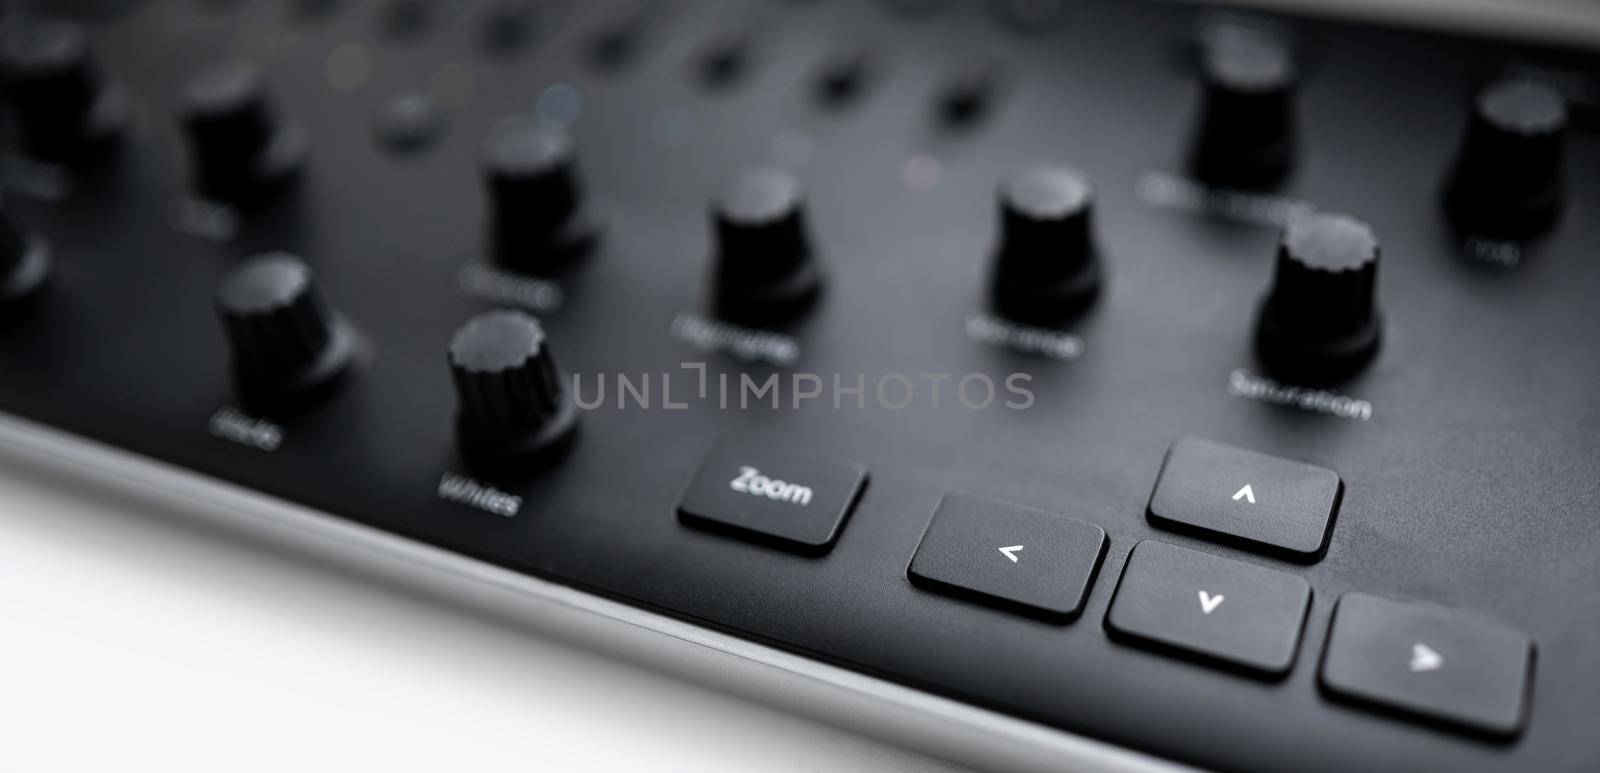 Editing Console, keyboard for edit video, images and sound